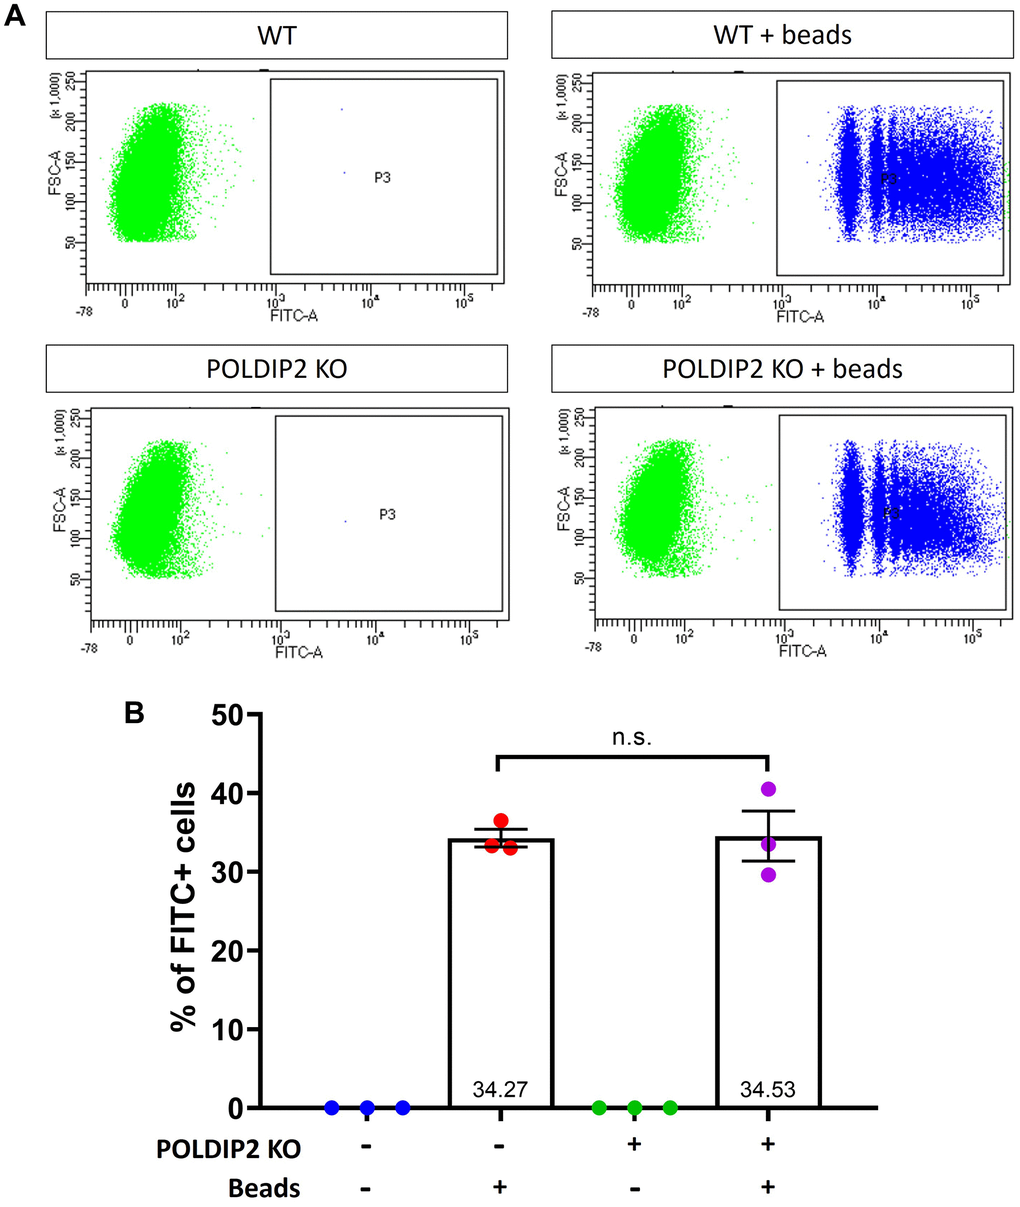 POLDIP2 KO cells show normal levels of phagocytosis. (A) Flow cytometry analysis of phagocytosis in WT and POLDIP2 KO treated with or without FITC+ fluospheres. (B) Pooled quantification results of n=3 biological repeats. Error bars represent SEM. n.s. not significant.